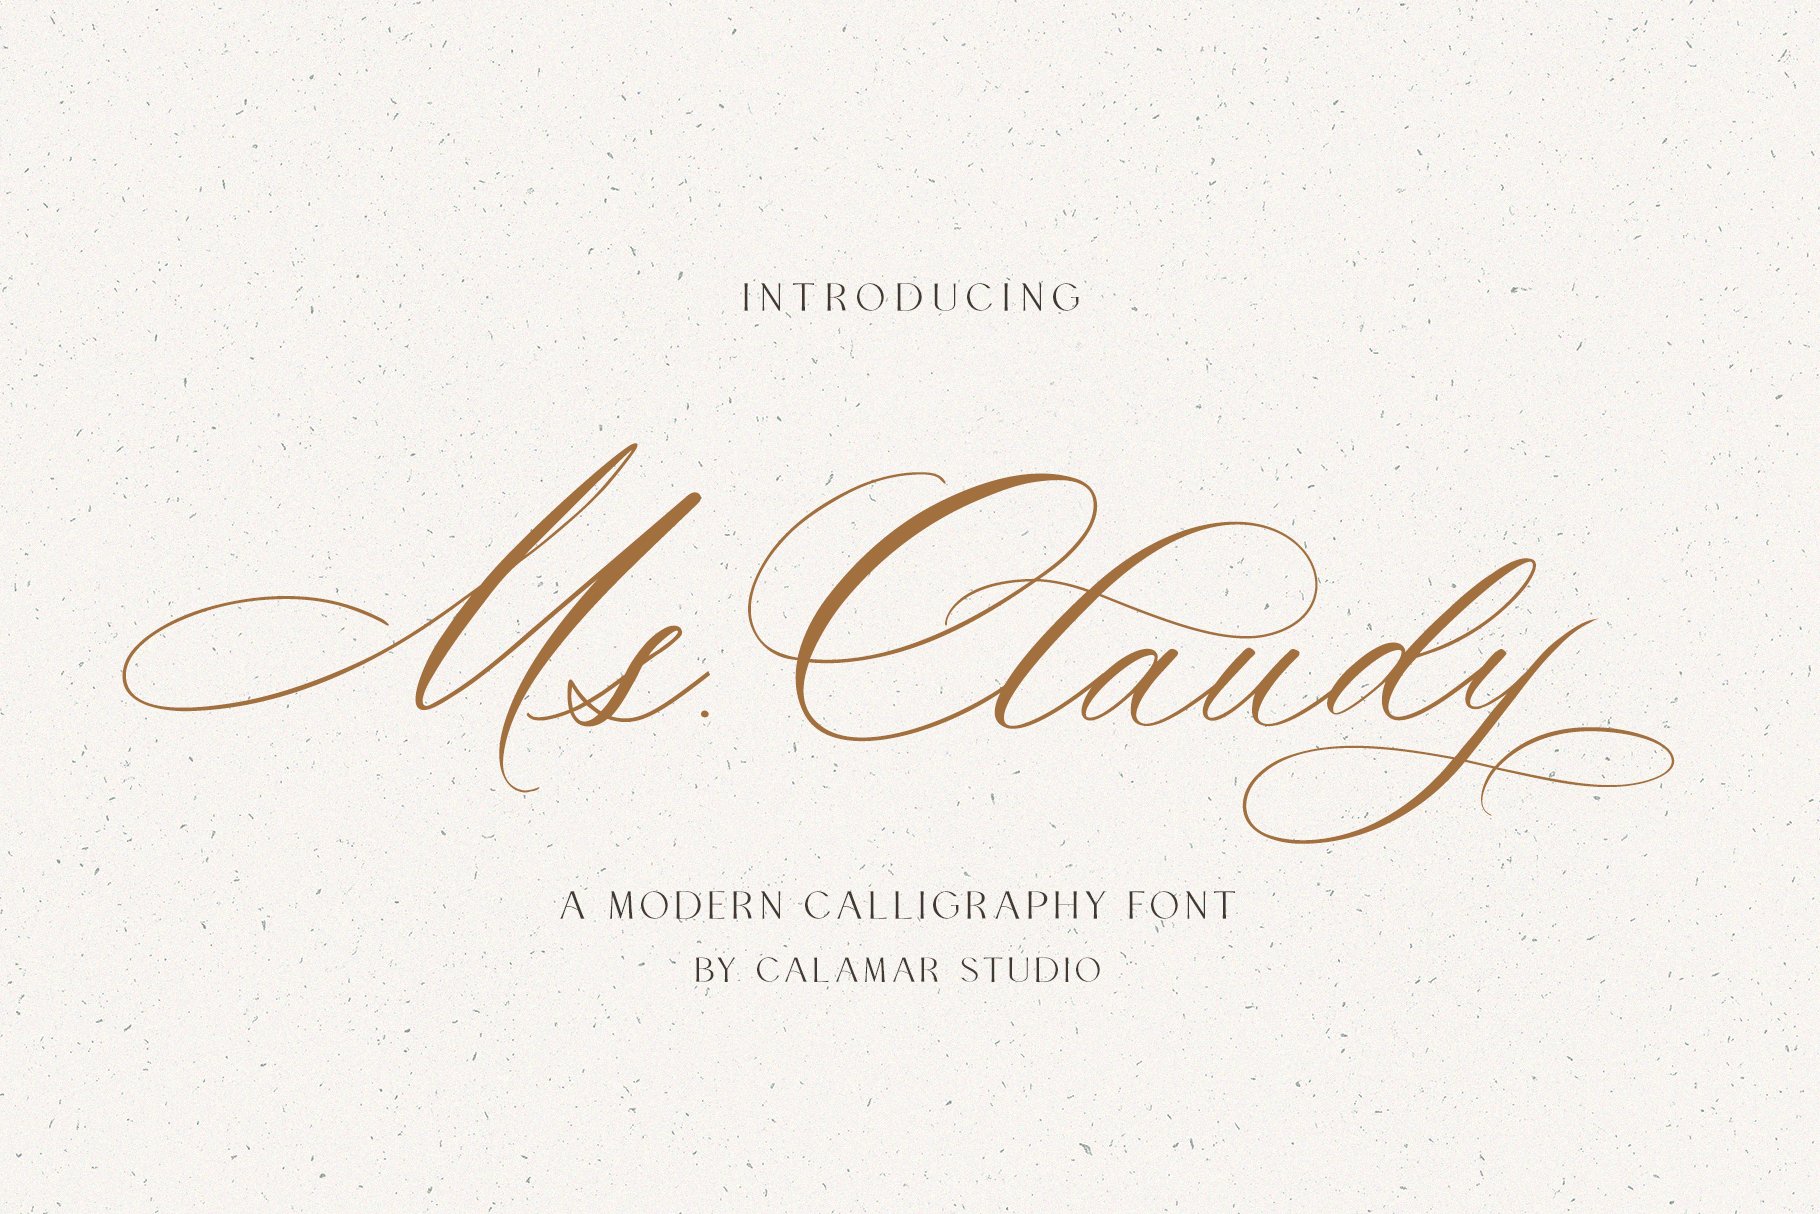 Ms Claudy | Wedding Calligraphy Font cover image.